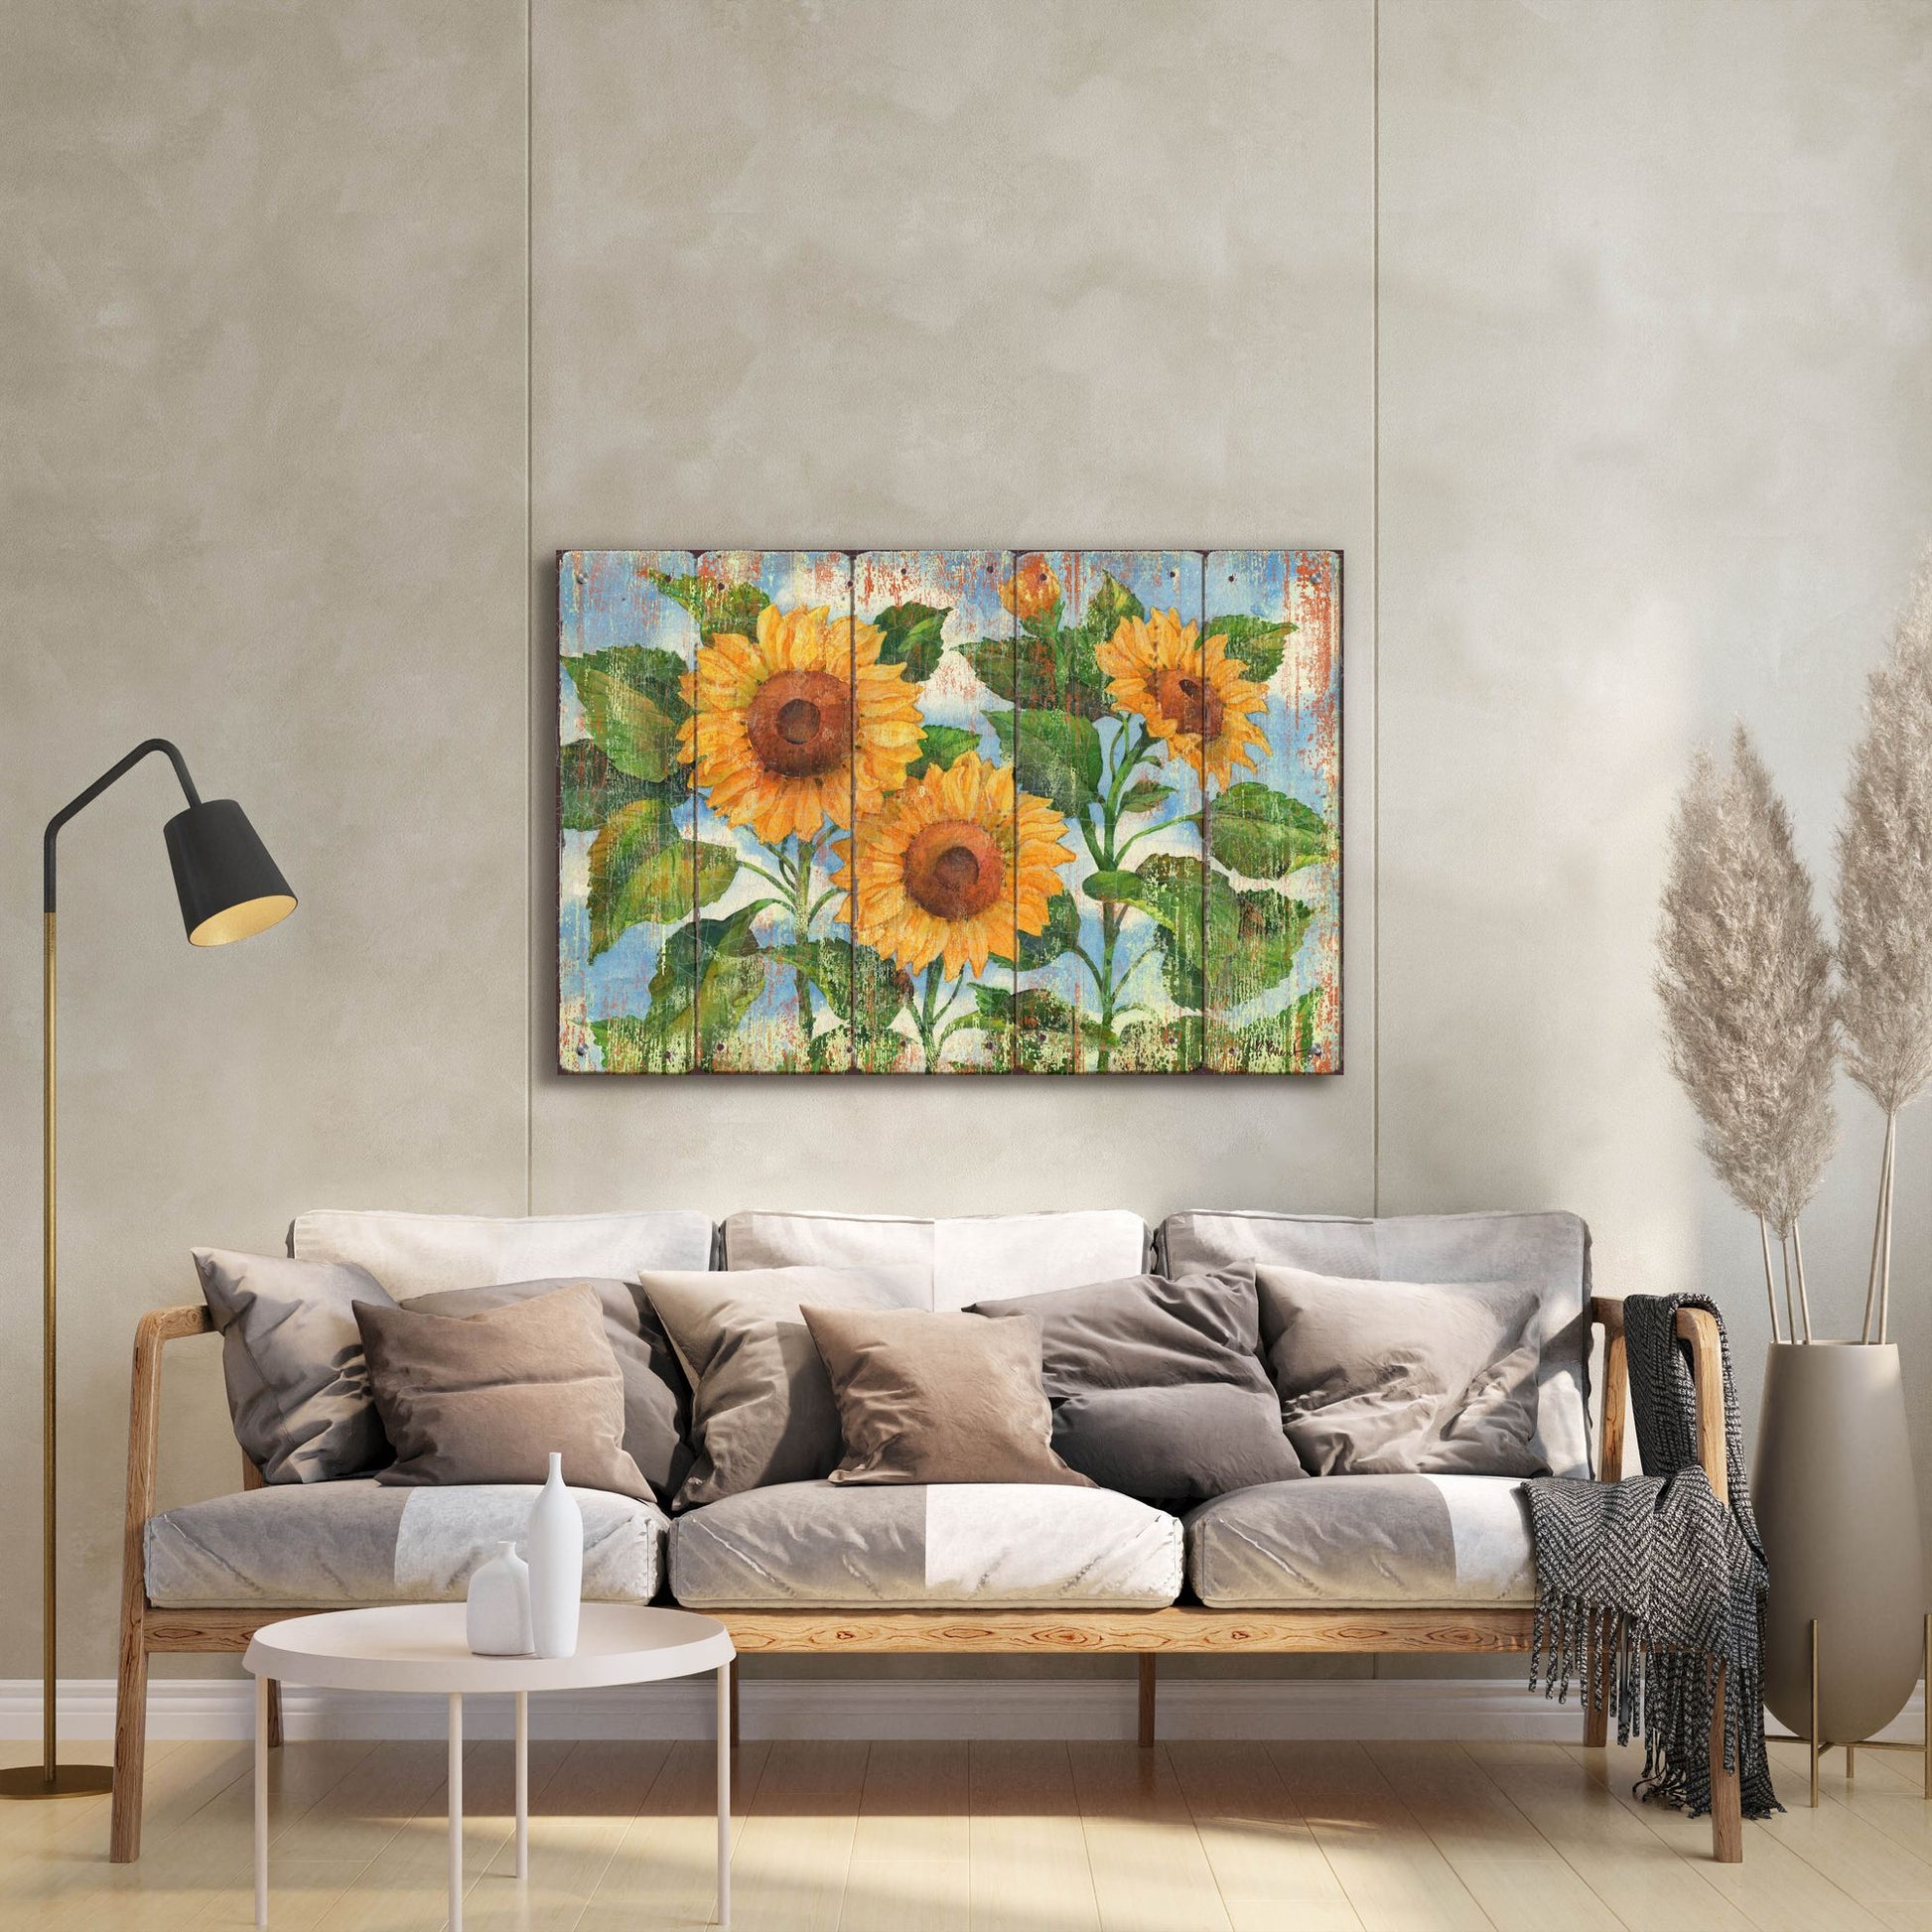 Epic Art 'Summer Sunflowers - Distressed' by Paul Brent, Acrylic Glass Wall Art,36x24